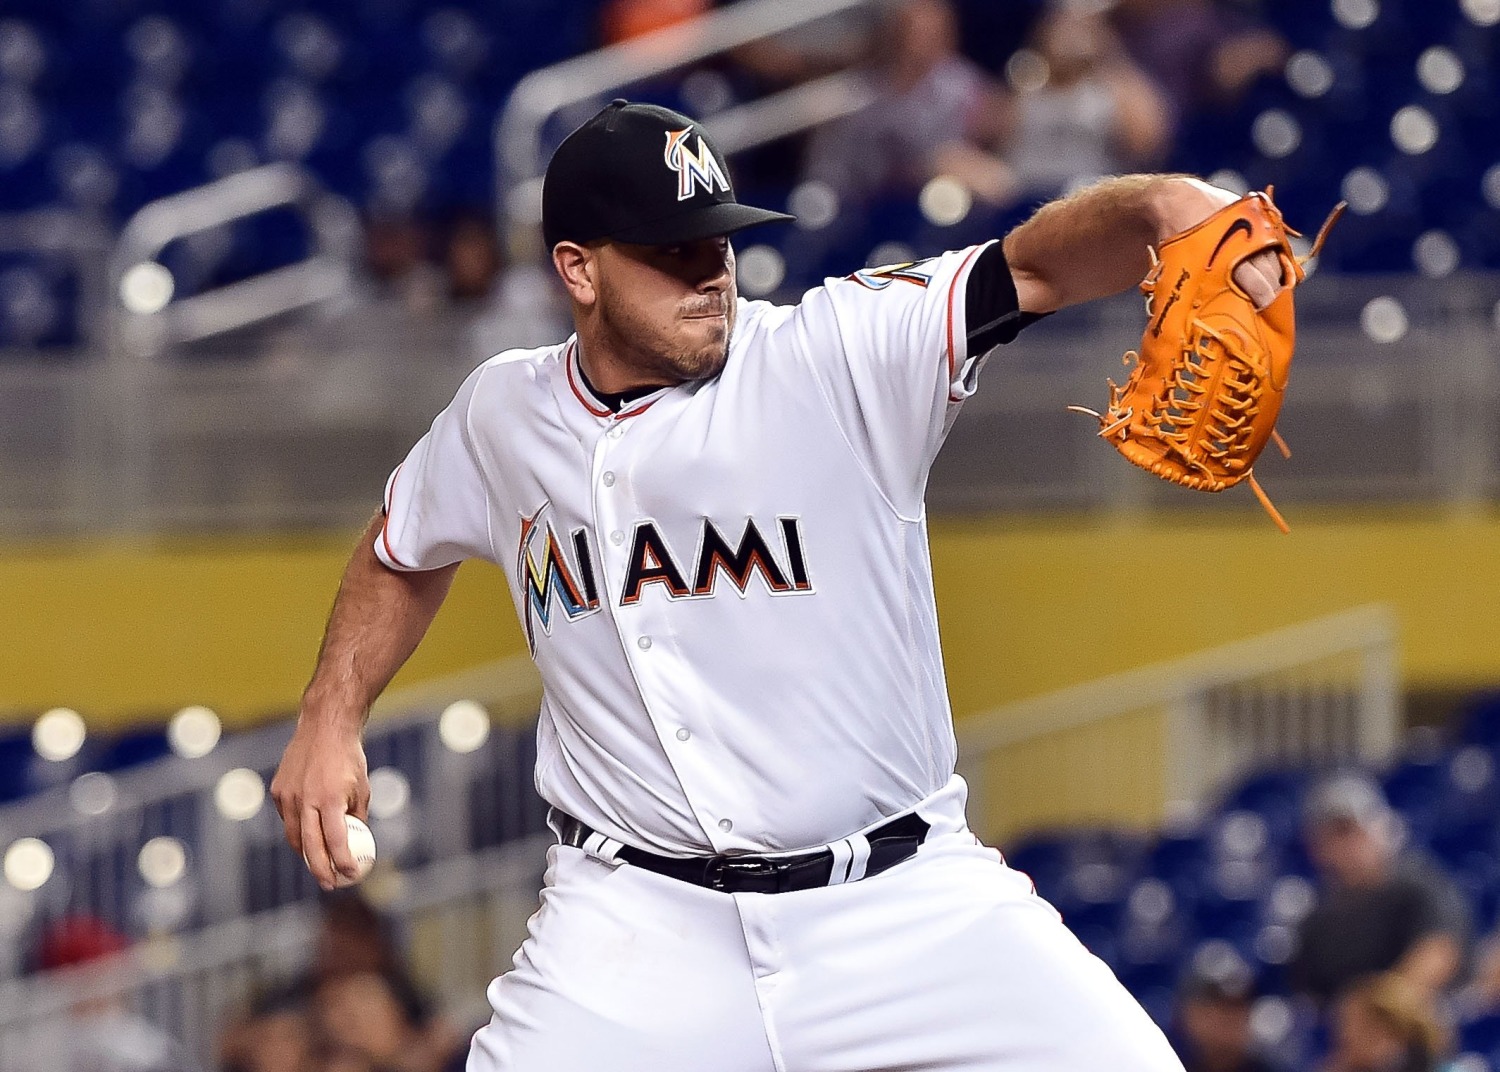 Everything seemed right in Jose Fernandez's life. Then it all went wrong.